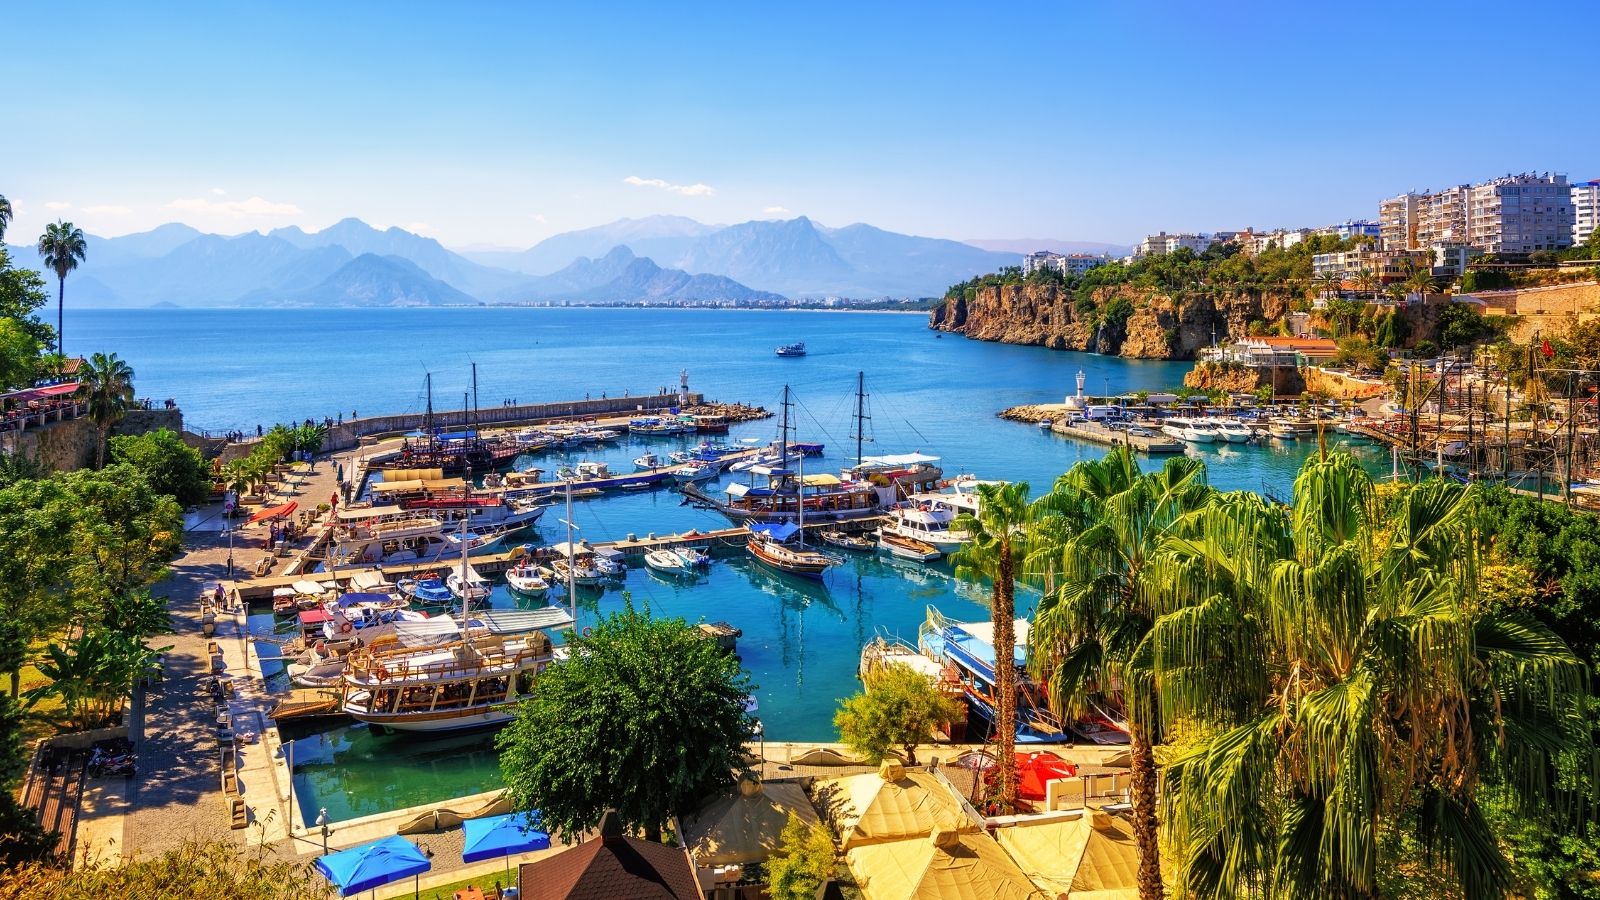 <p><span>Antalya, Turkey, is a </span><span>famous</span><span> vacation resort city on the Mediterranean coast. It’s known for its beautiful beaches, historic city center, and vibrant local culture. It is also popular with people wanting to explore the area by chartered yacht for a fraction of the price of the nearby Greek Islands. Lara Beach enjoys luxury hotels and bars, making this an excellent</span><span> base to charter a yacht. Charter fees range from $270 per day out of shoulder season and $540 in peak. More luxurious yachts are more expensive, with the price increasing the more significant</span><span> the size and number of modern features. </span></p>